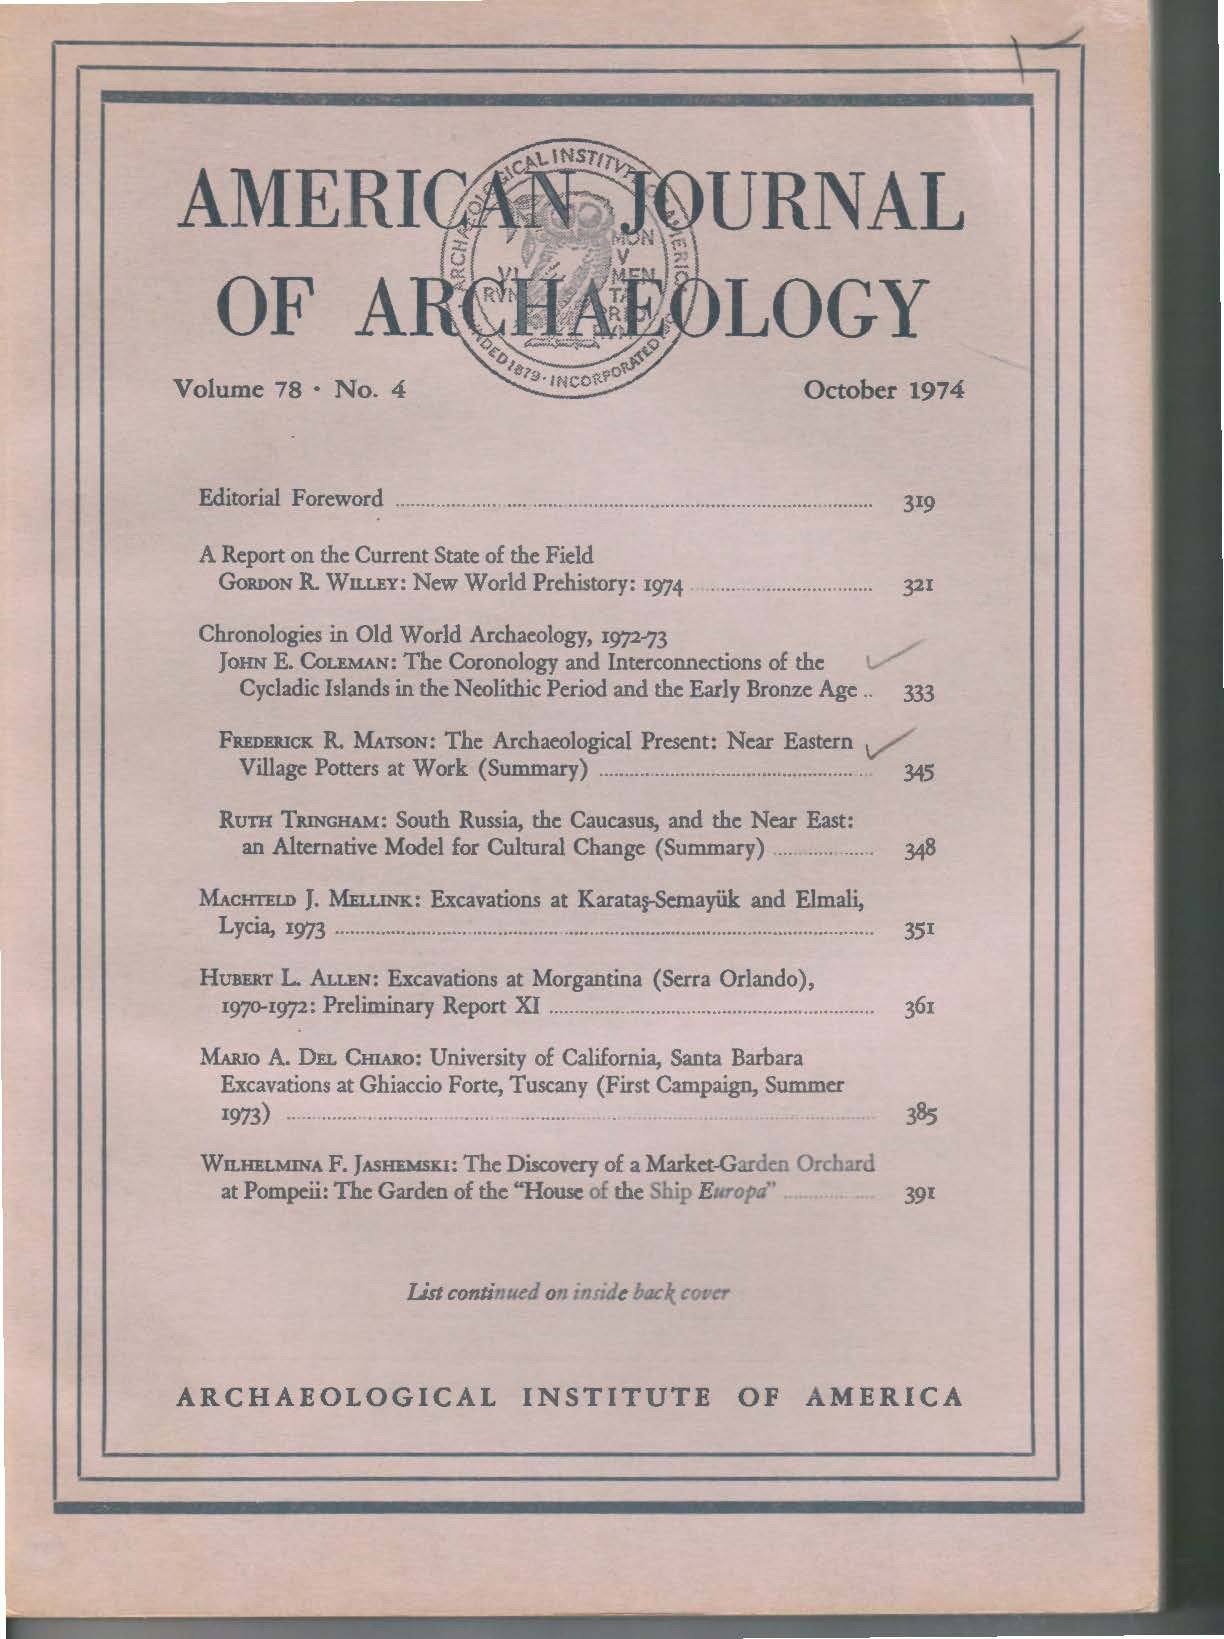 American Journal of Archaeology Vol. 78  No.4 - Sands of Time Ancient Art